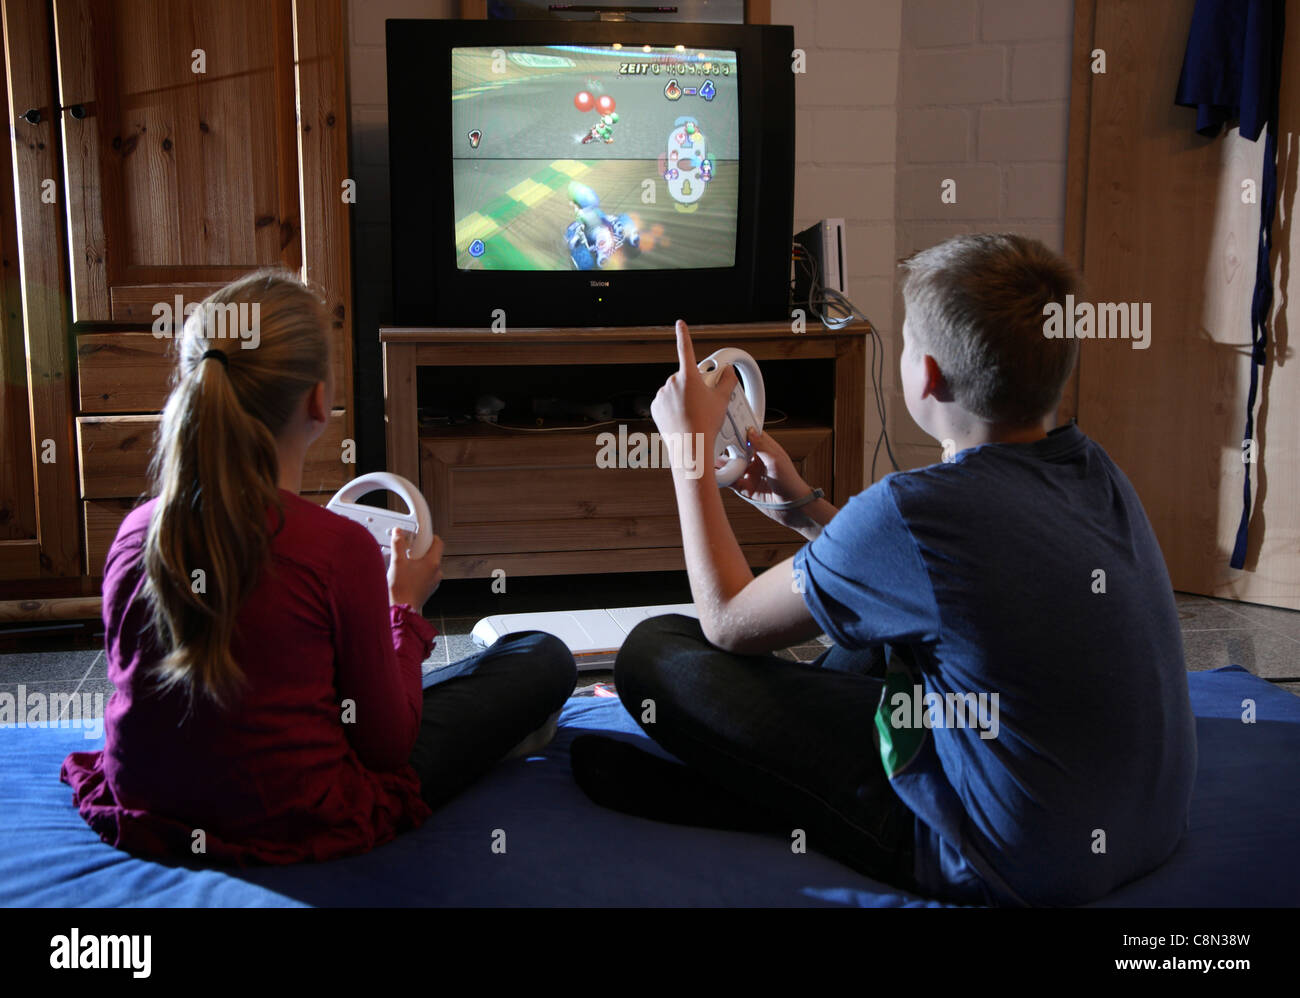 Two kids, girl 10 and boy 13 years old, playing at home with a WII video game. Stock Photo